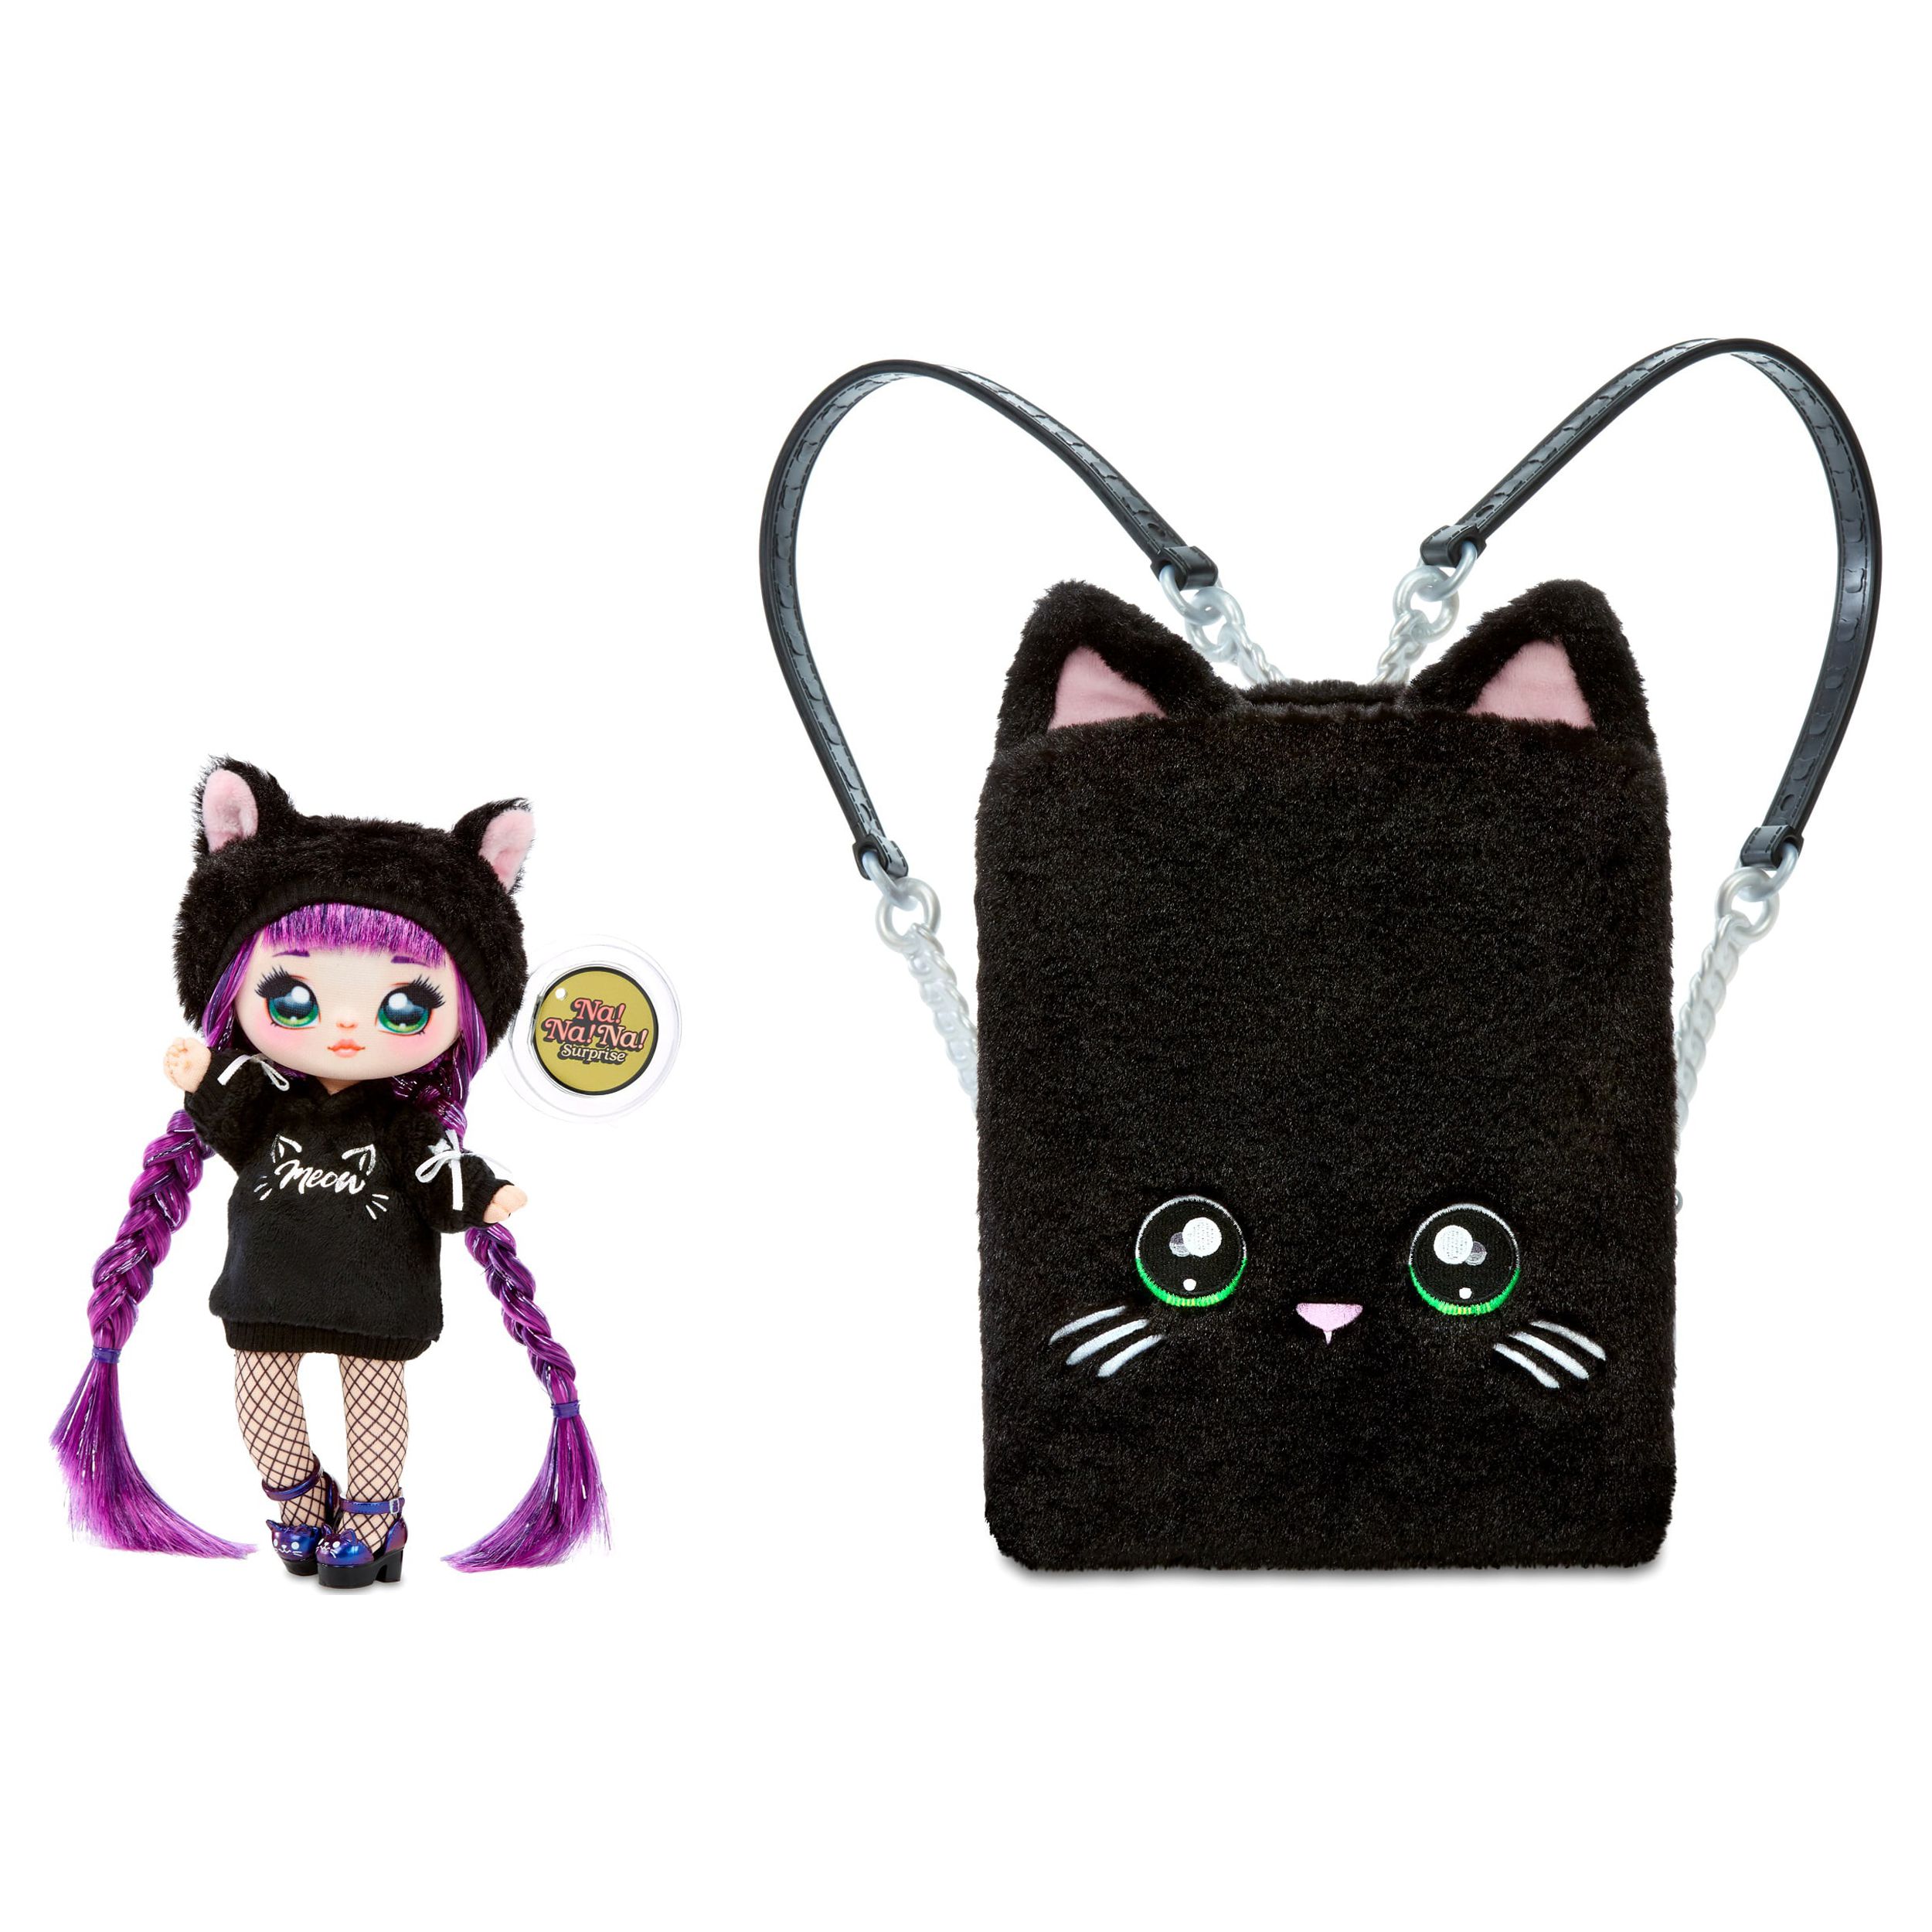 Na! Na! Na! Surprise 3-in-1 Backpack Bedroom Black Kitty with Limited Edition Doll Playset - image 4 of 7